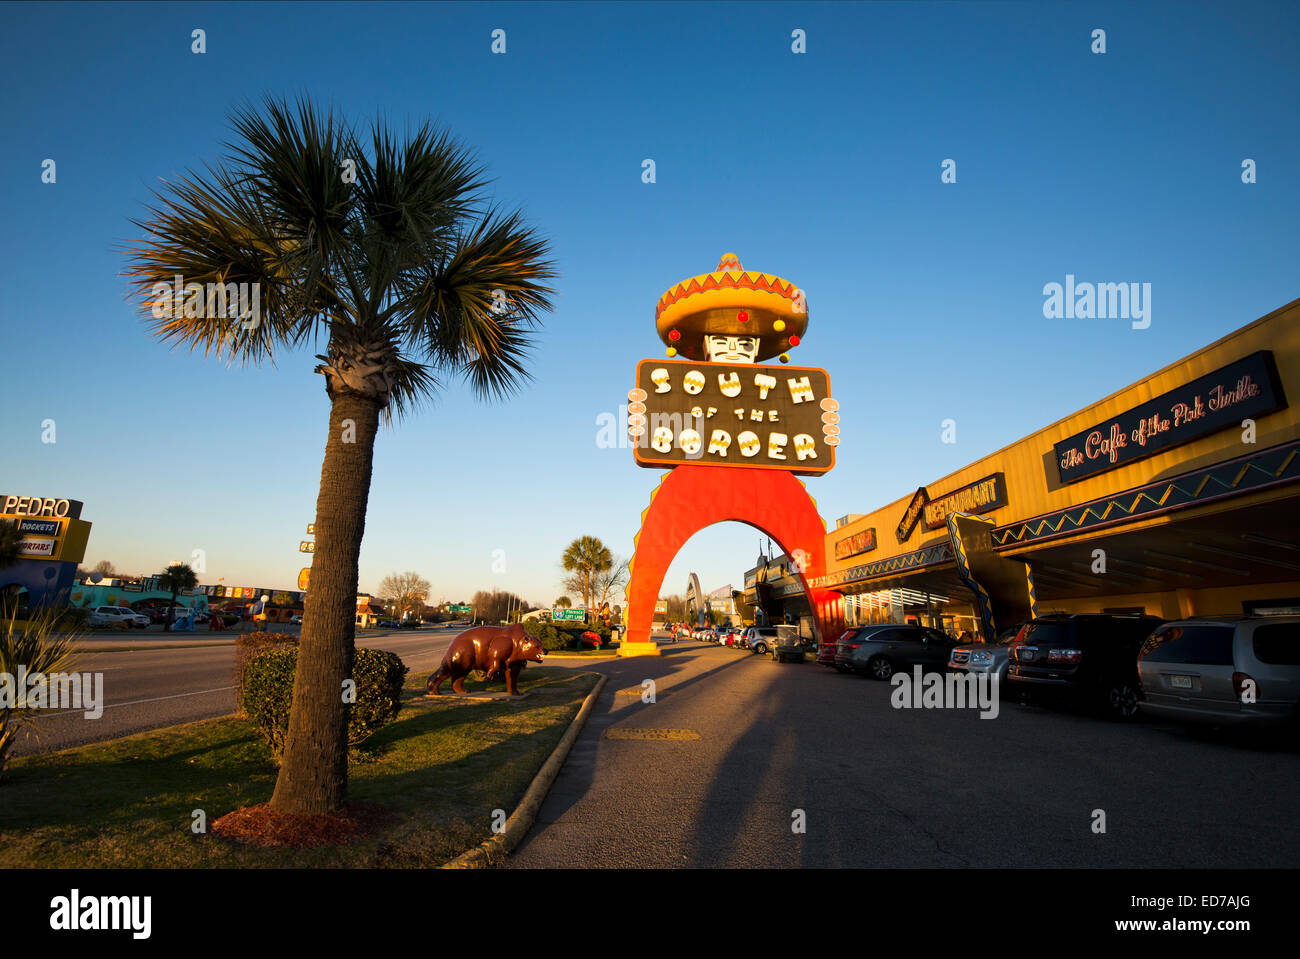 South of the Border sign at Sunset wide angle Stock Photo